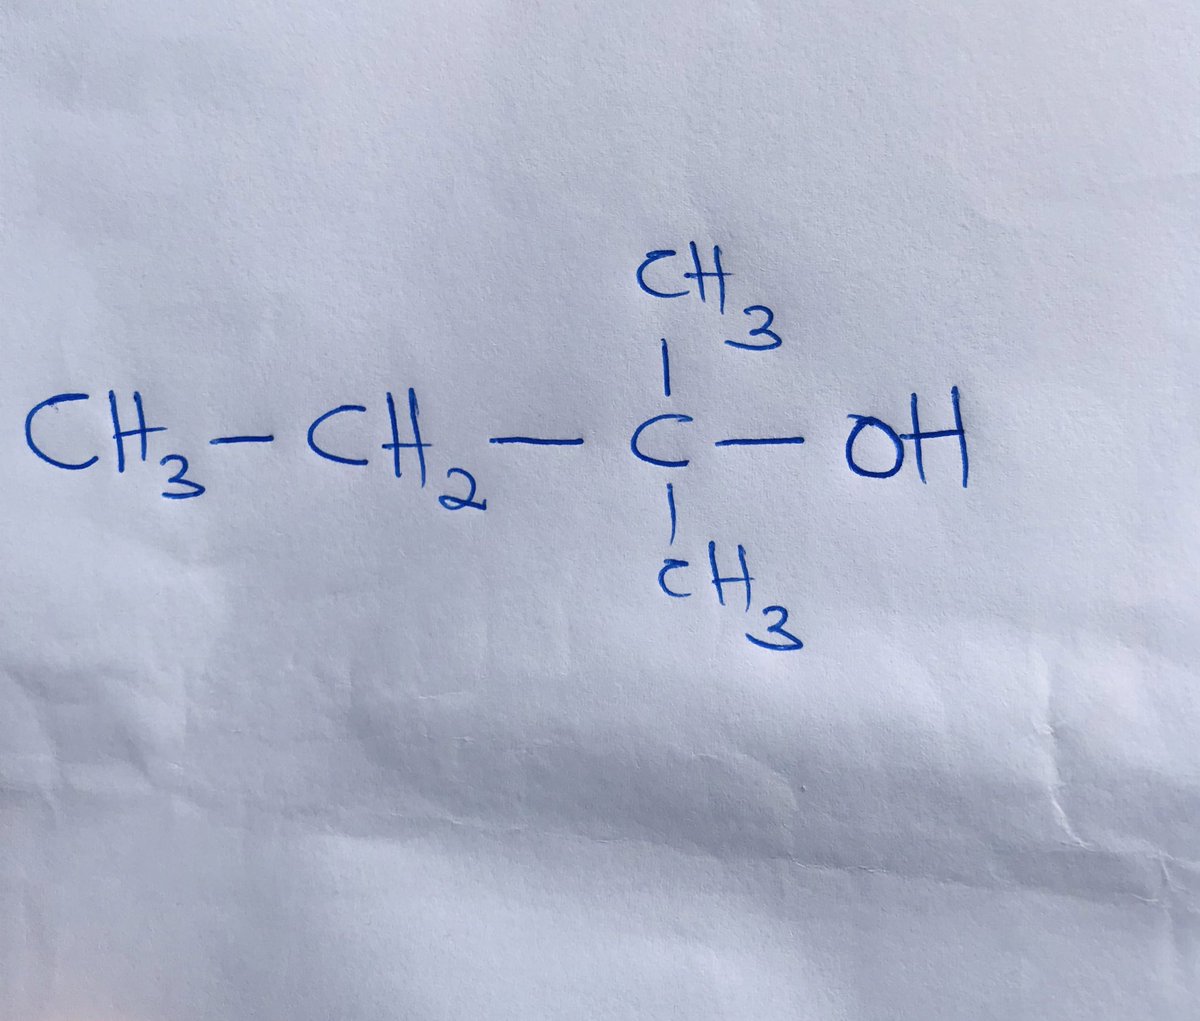 Today’s vibe🤝😄 What’s the name of this organic compound?🤔